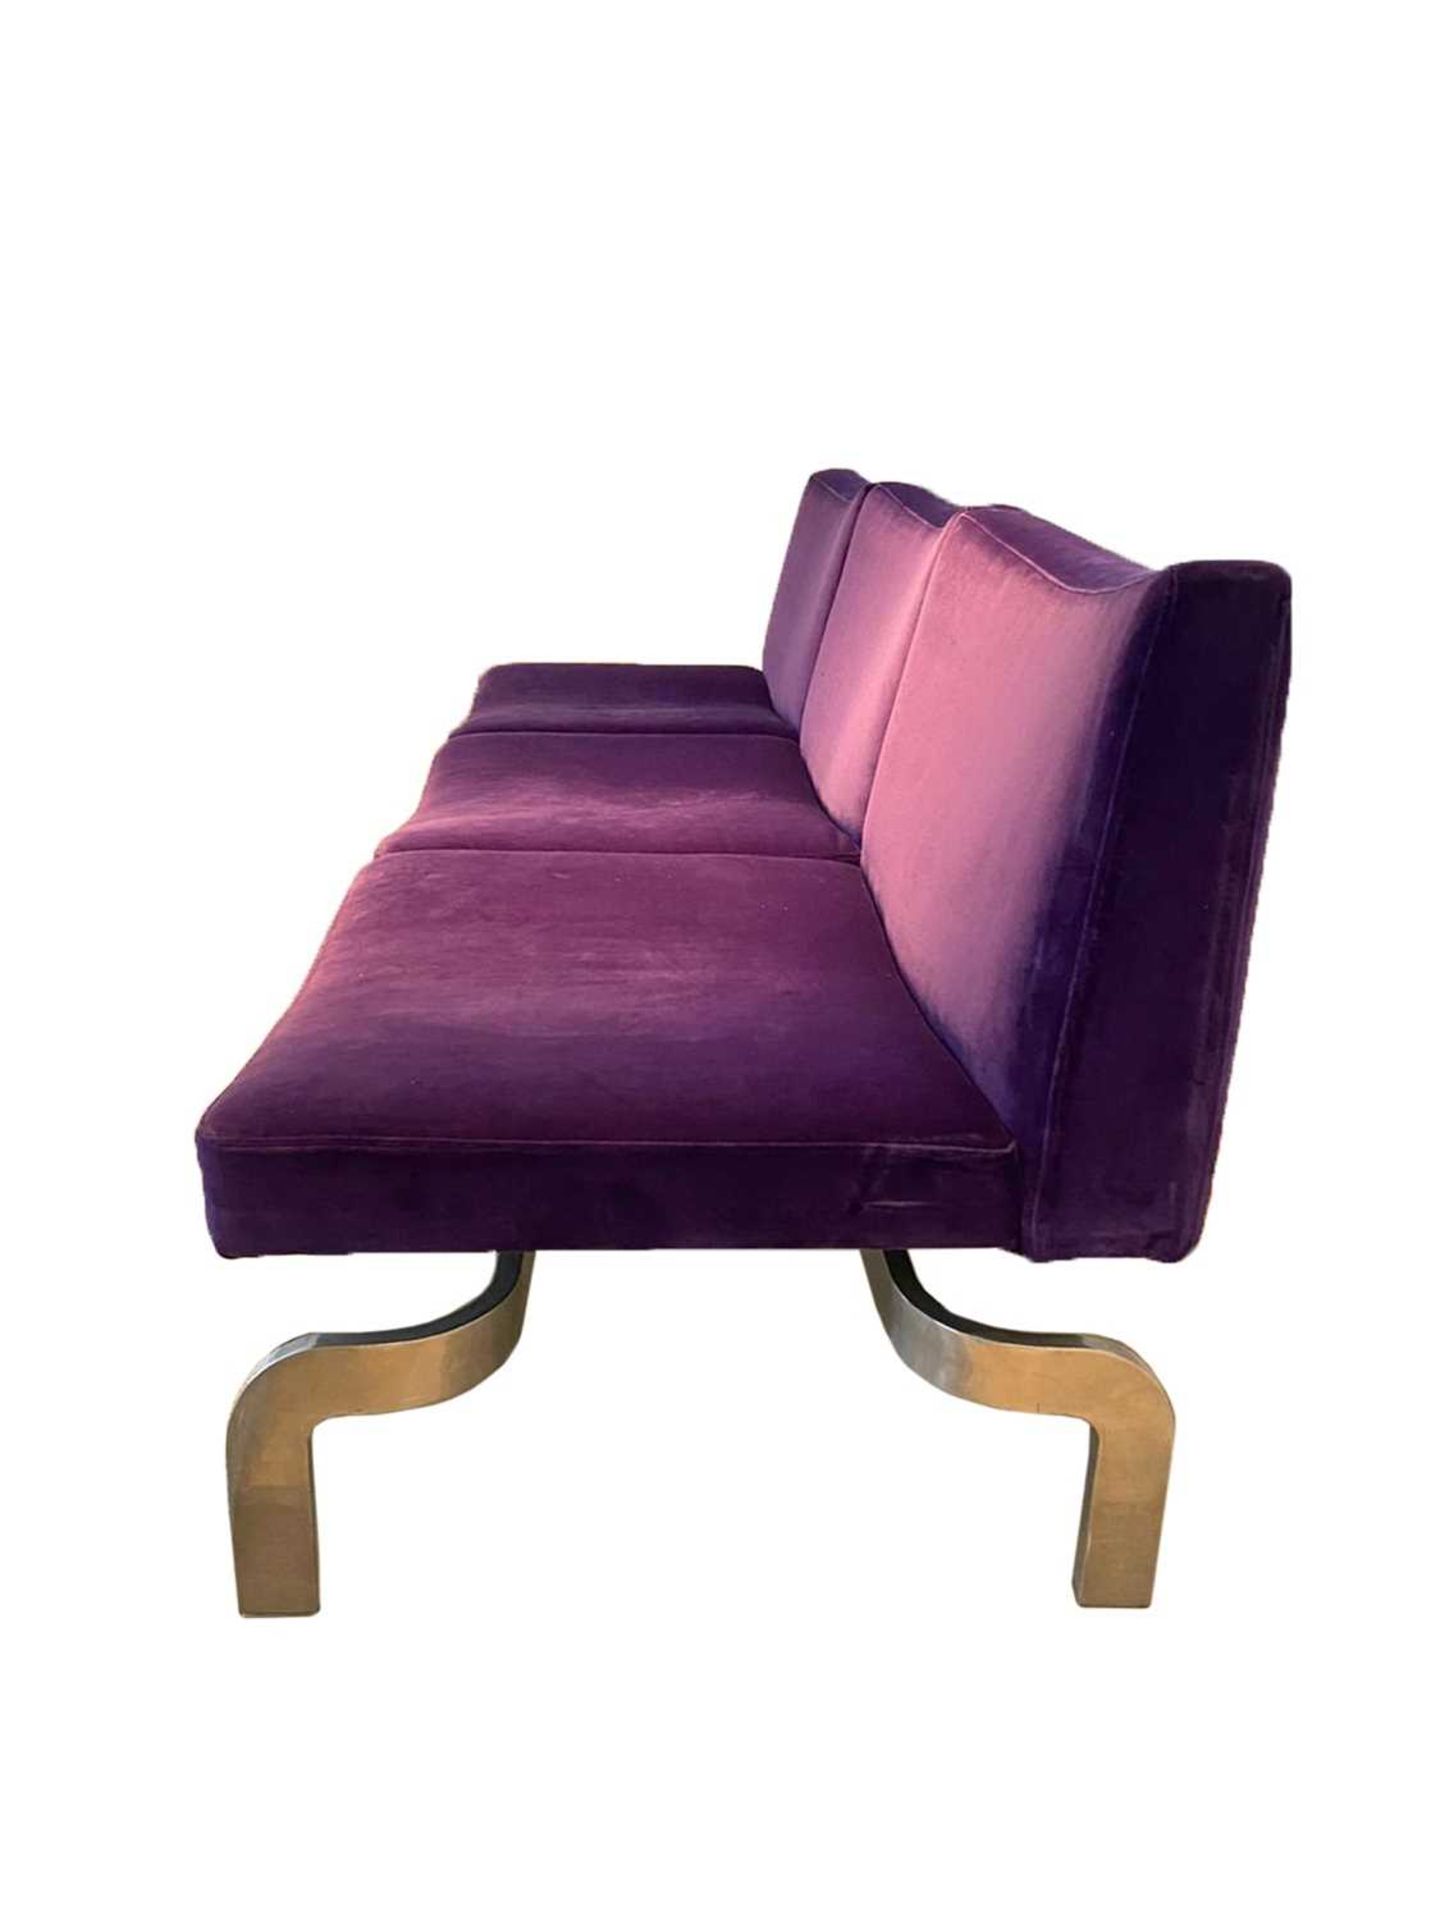 A pair of purple upholstered settees, - Image 3 of 4